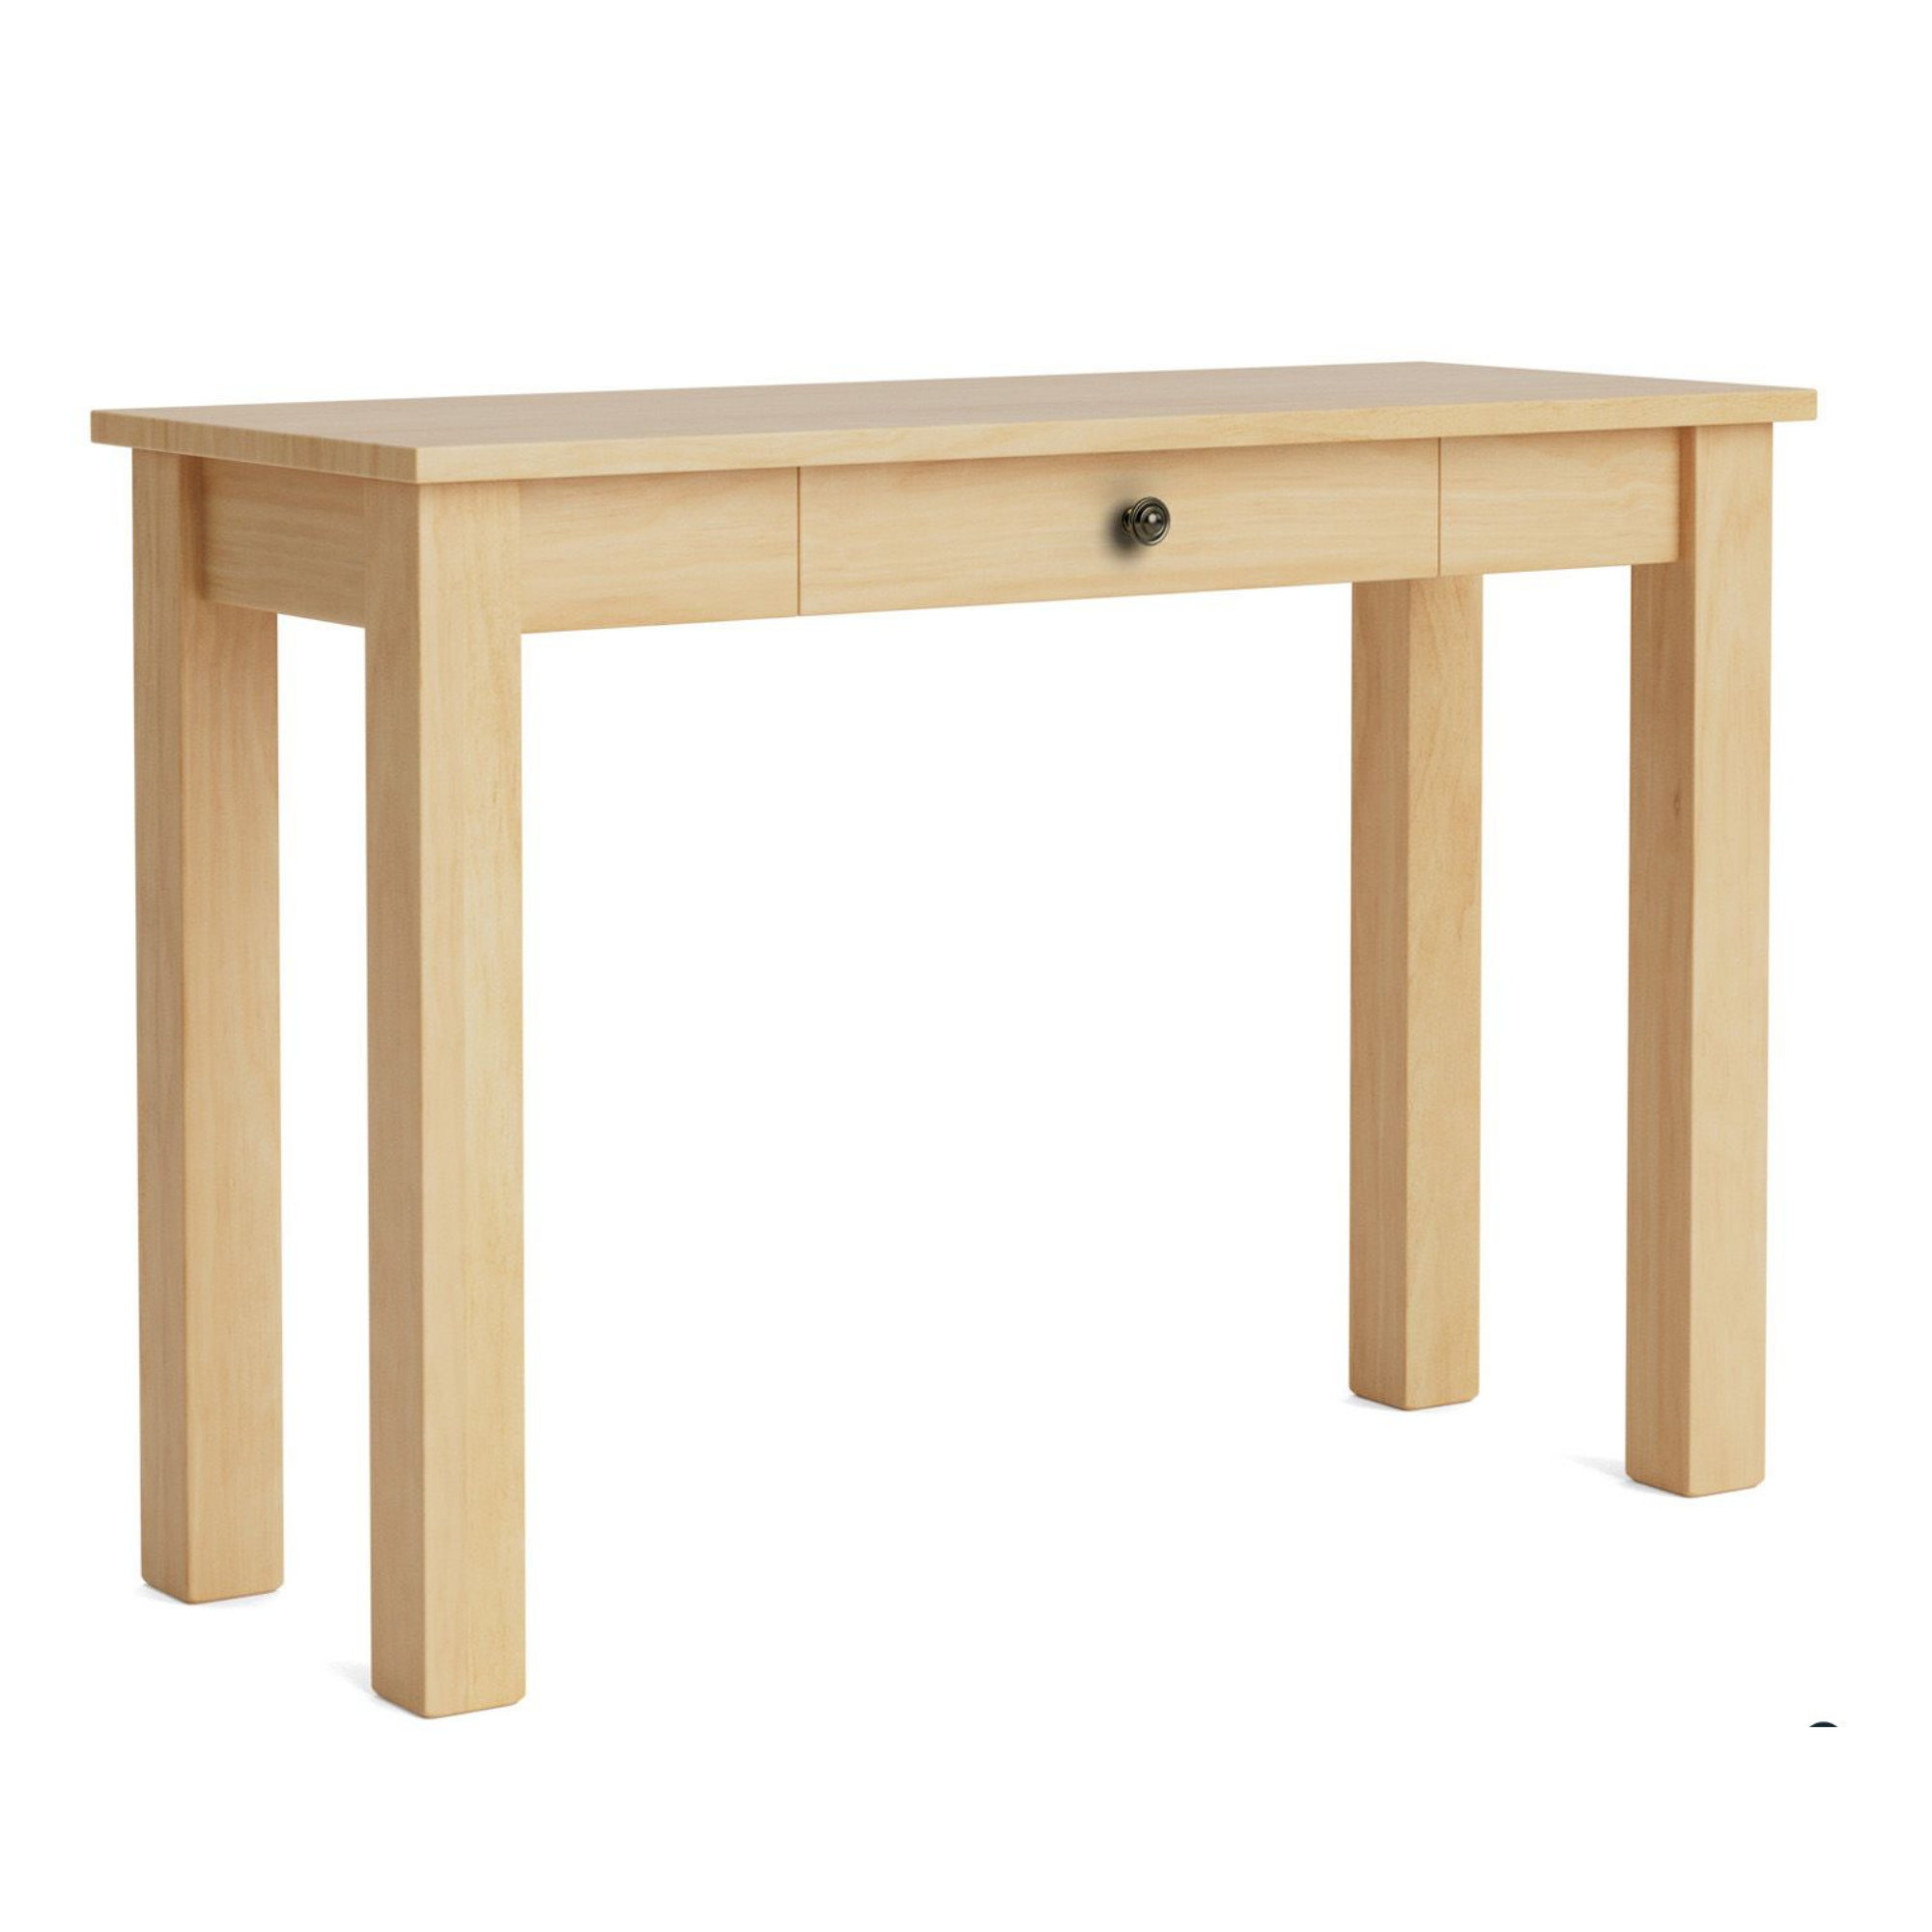 CHARLTON HALL TABLE WITH A DRAWER | NZ MADE